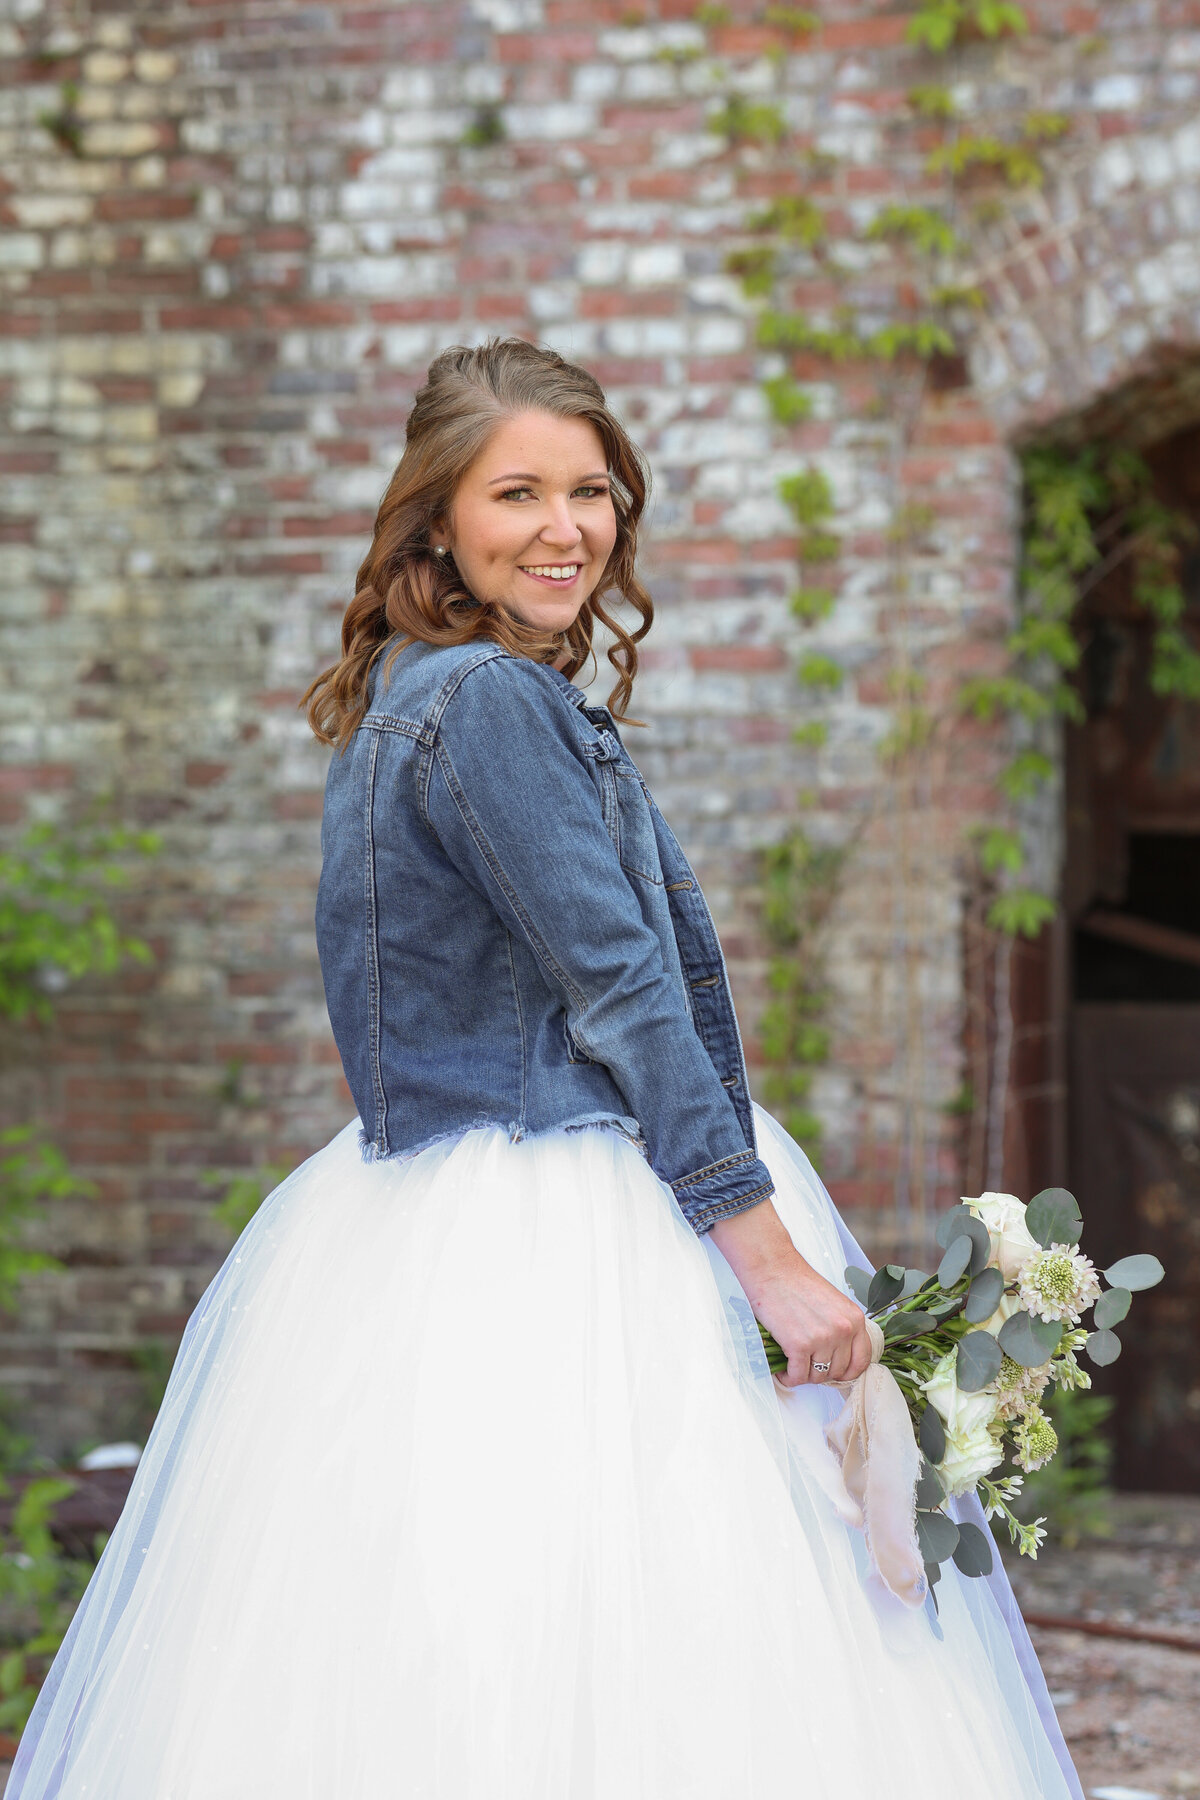 bride wearing blue jean jacket and holding white floral bouquet at The Bibb Mill by Columbus Georgia wedding photographer Amanda Richardson Photography